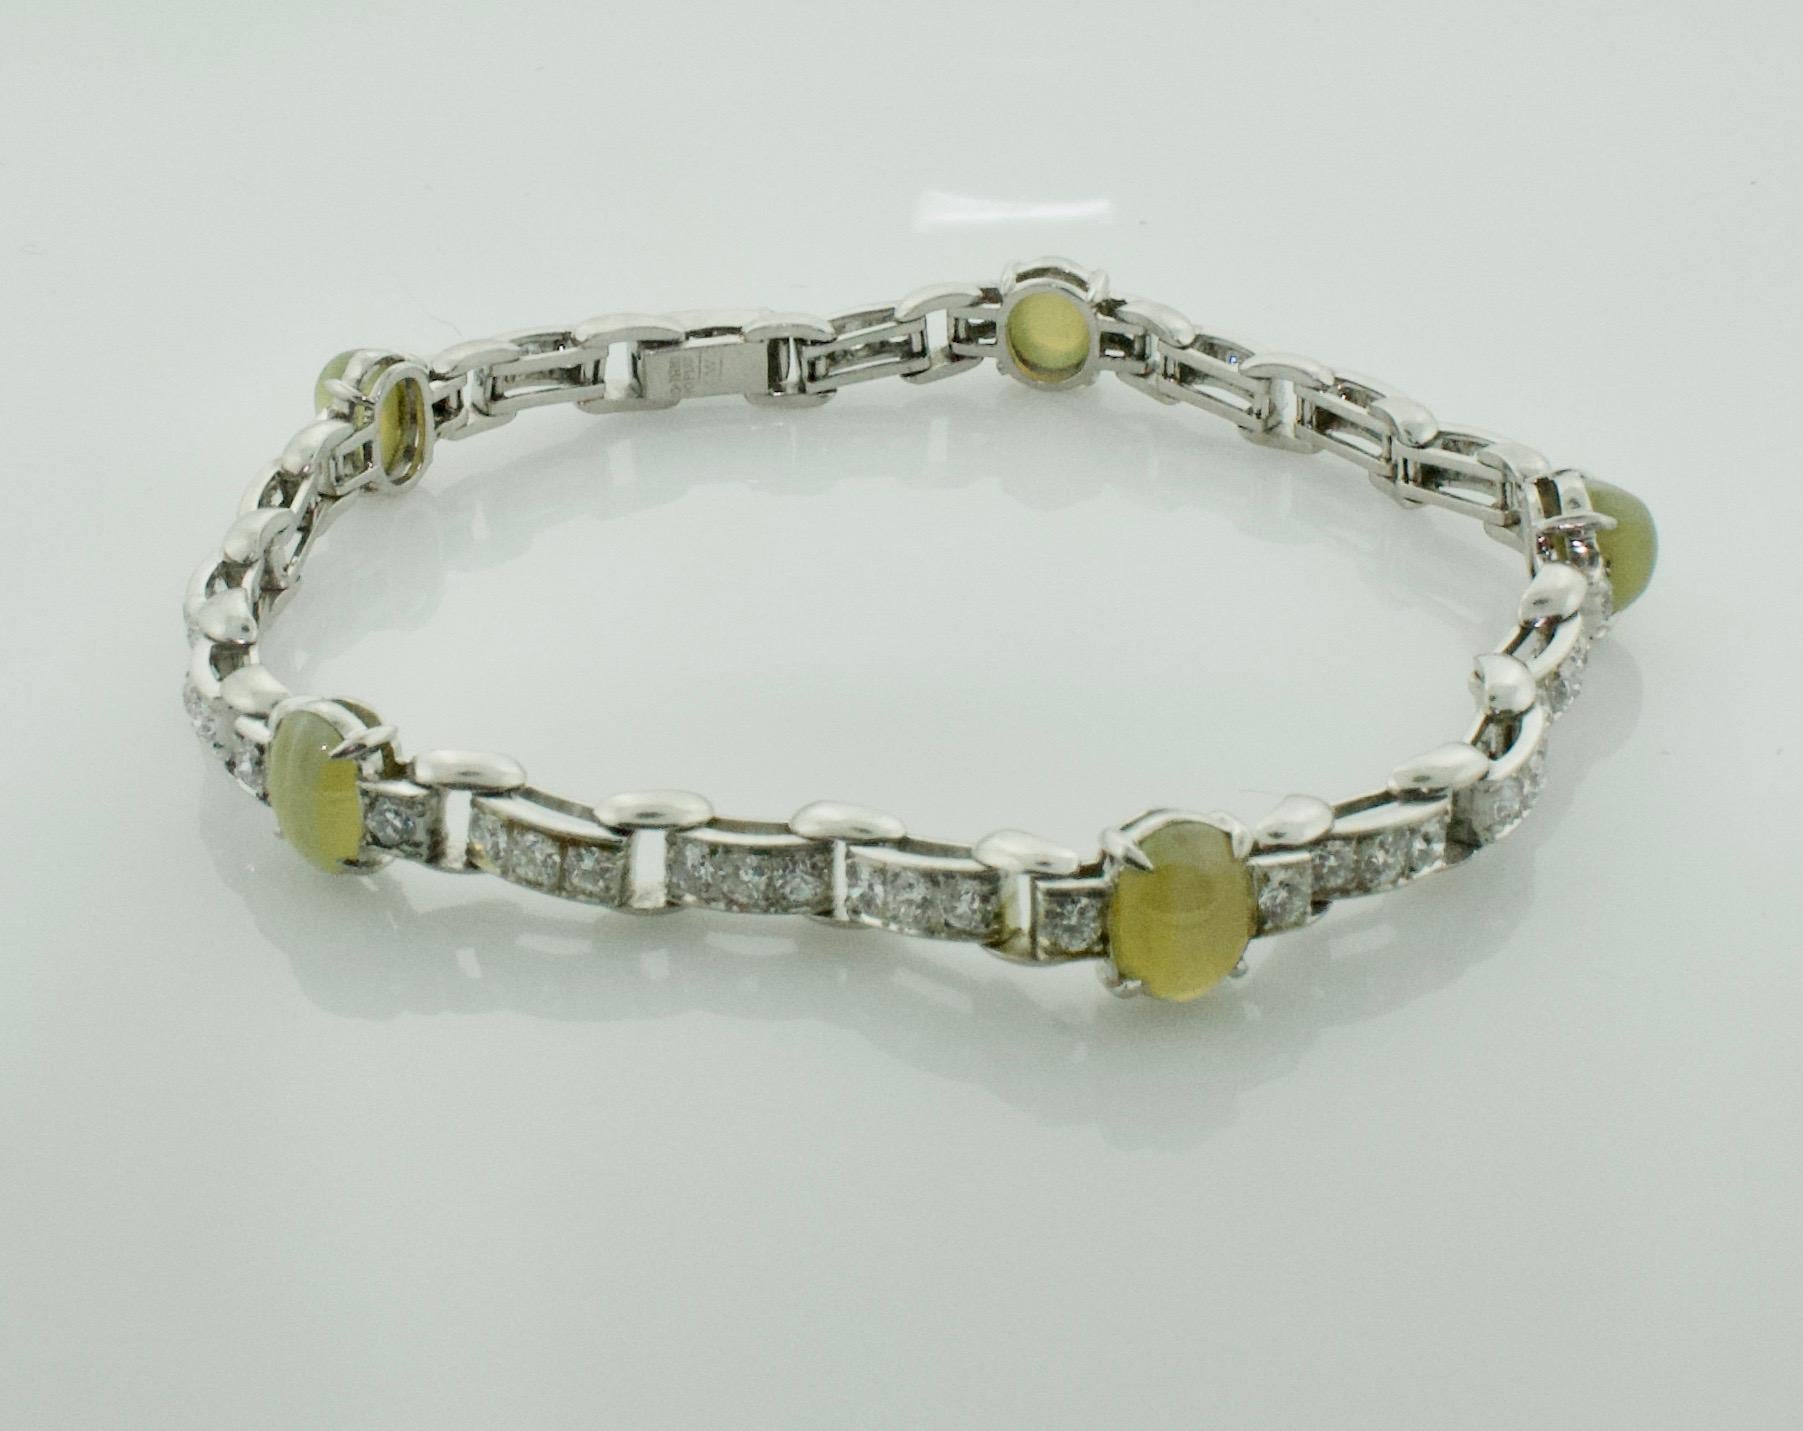 Catseye and Diamond Bracelet in Platinum Circa 1940 by Wasslikoff
Five Fine Chrysoberyl Catseyes Weighing 6.15 Carats Approximately 
55 Round Brilliant Cut Diamonds Weighing 2.35 Carats Approximately 
With Original Appraisal from 1946
Created by